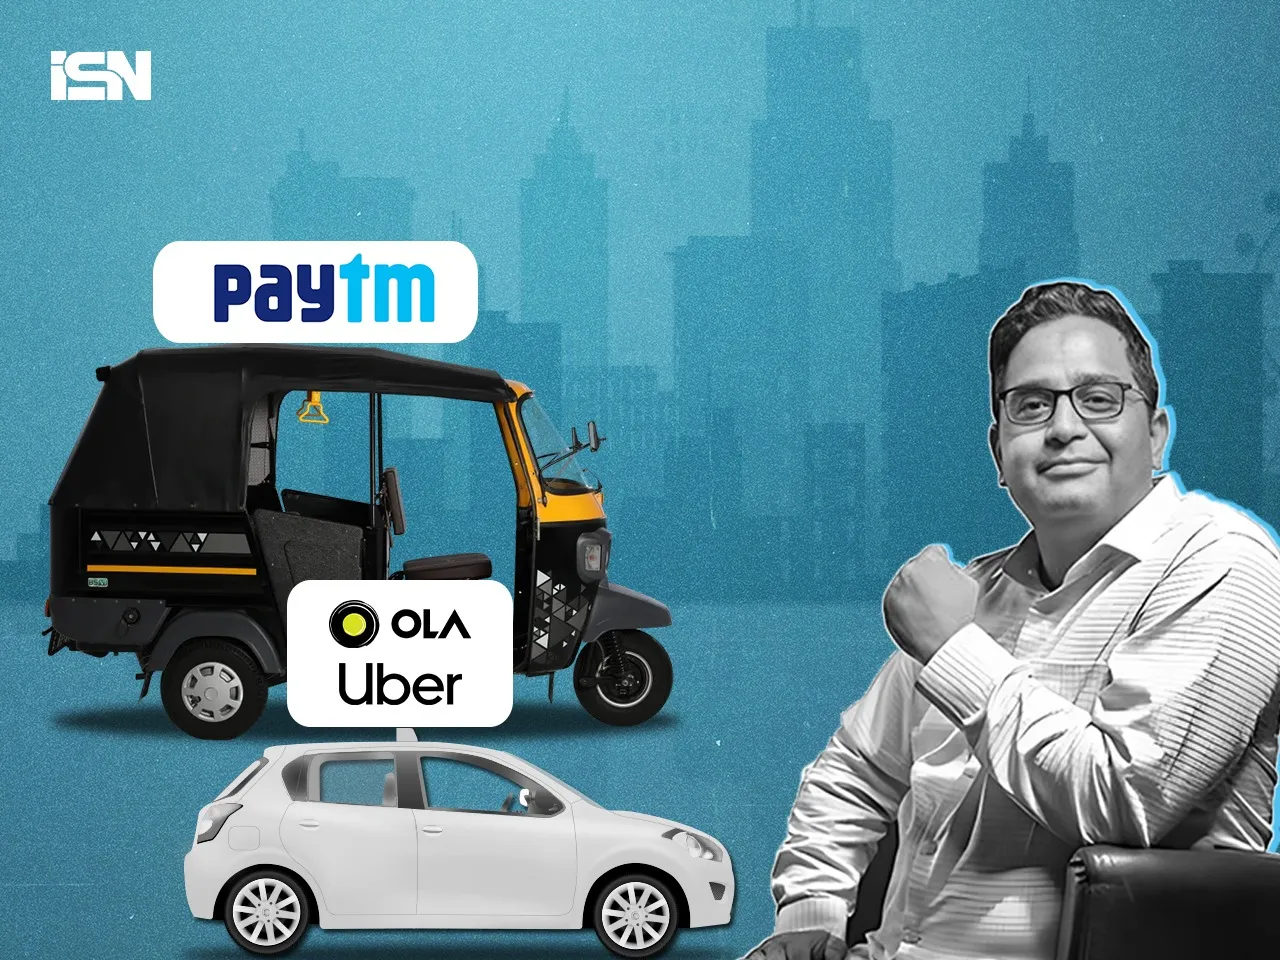 Paytm enters ride-hailing sector through ONDC to challenge duopoly of Ola-Uber: Report